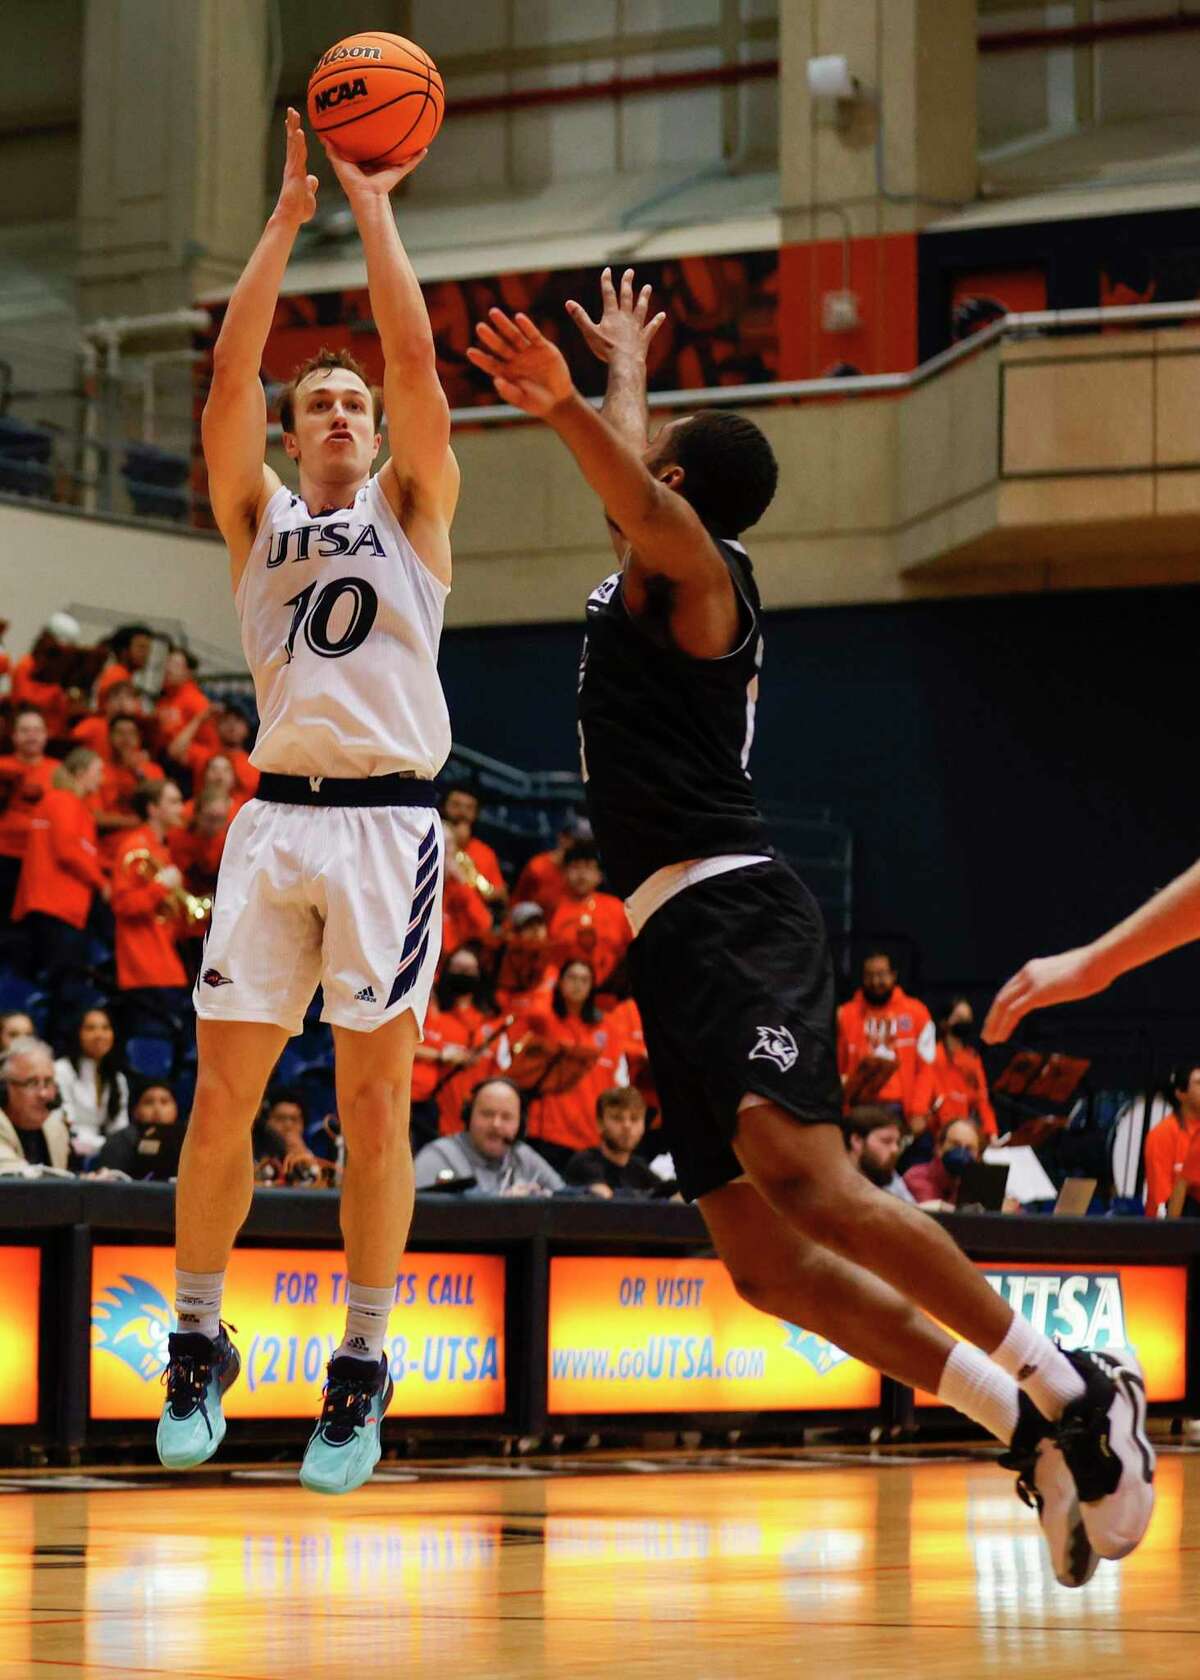 UTSA guard Erik Czumbel (10) shoots a three-pointer over Rice guard Terrance McBride (13) during the second half at the Convocation Center, Saturday, March 5, 2022 in San Antonio, Texas. The Roadrunners defeated the Owls 82-71.